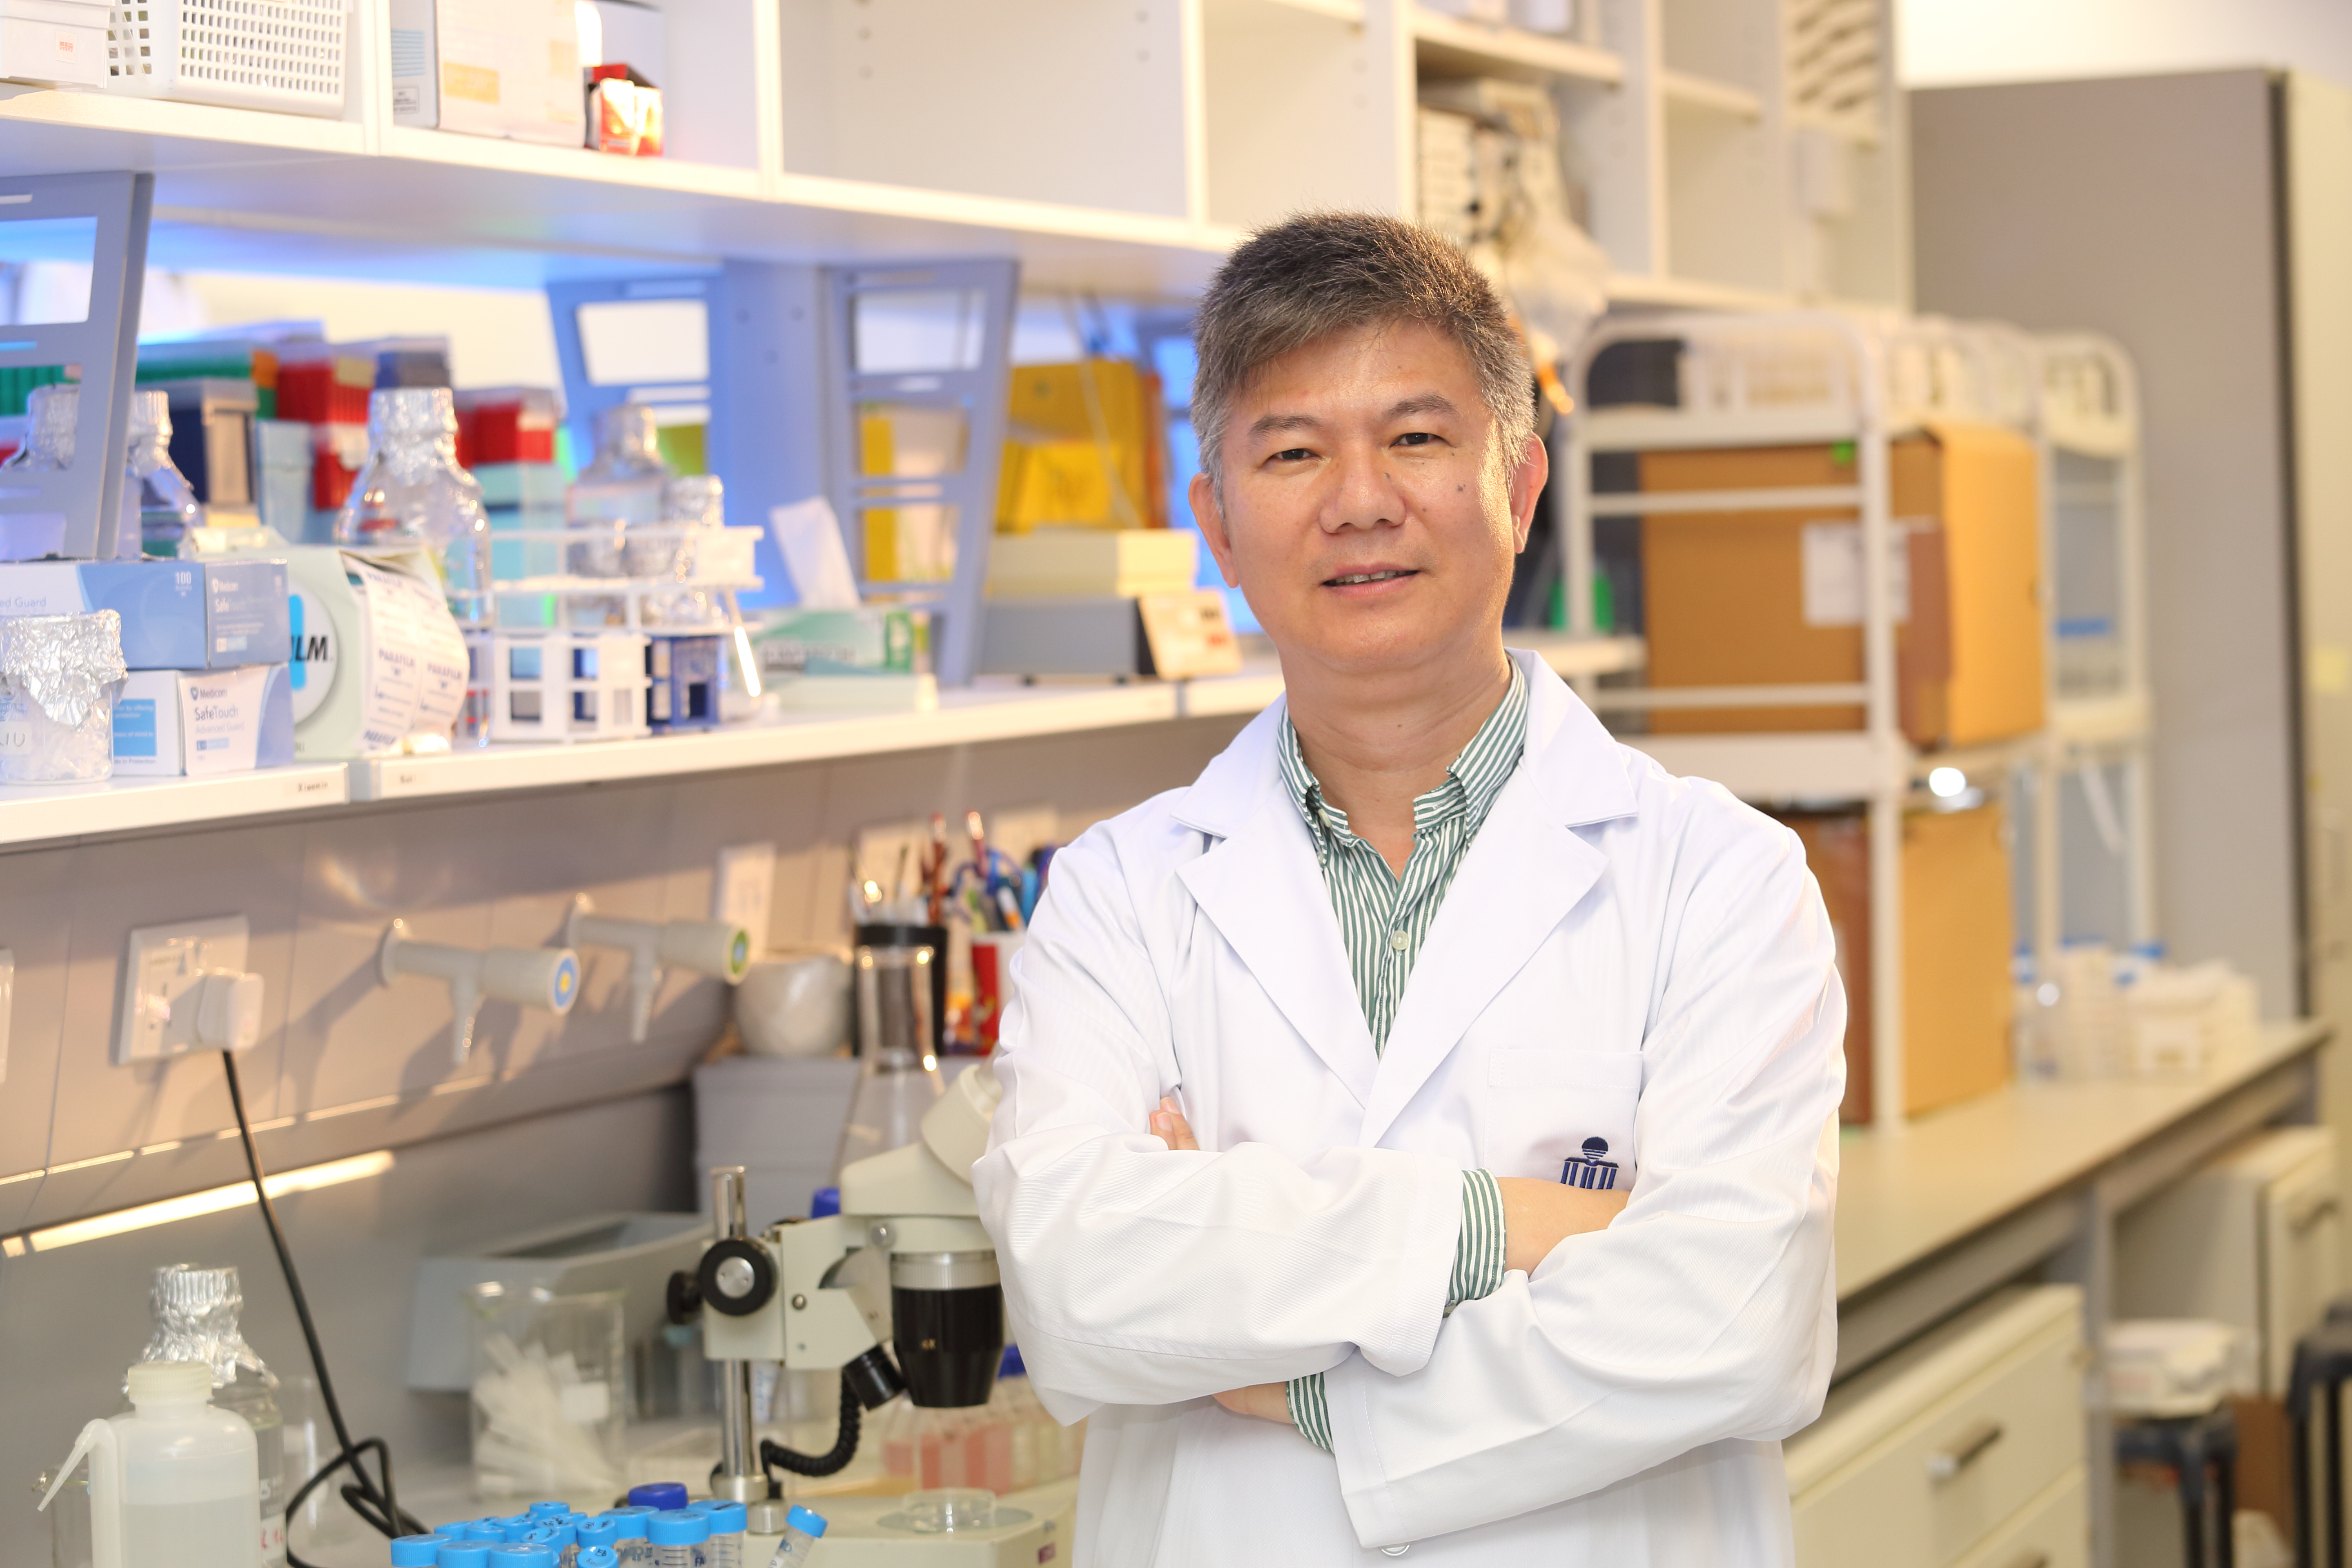 A research led by Prof. LIU Hongbin, Associate Head and Chair Professor of HKUST’s Department of Ocean Science, has shown growing dominance of diatom algae in the Pearl River Estuary